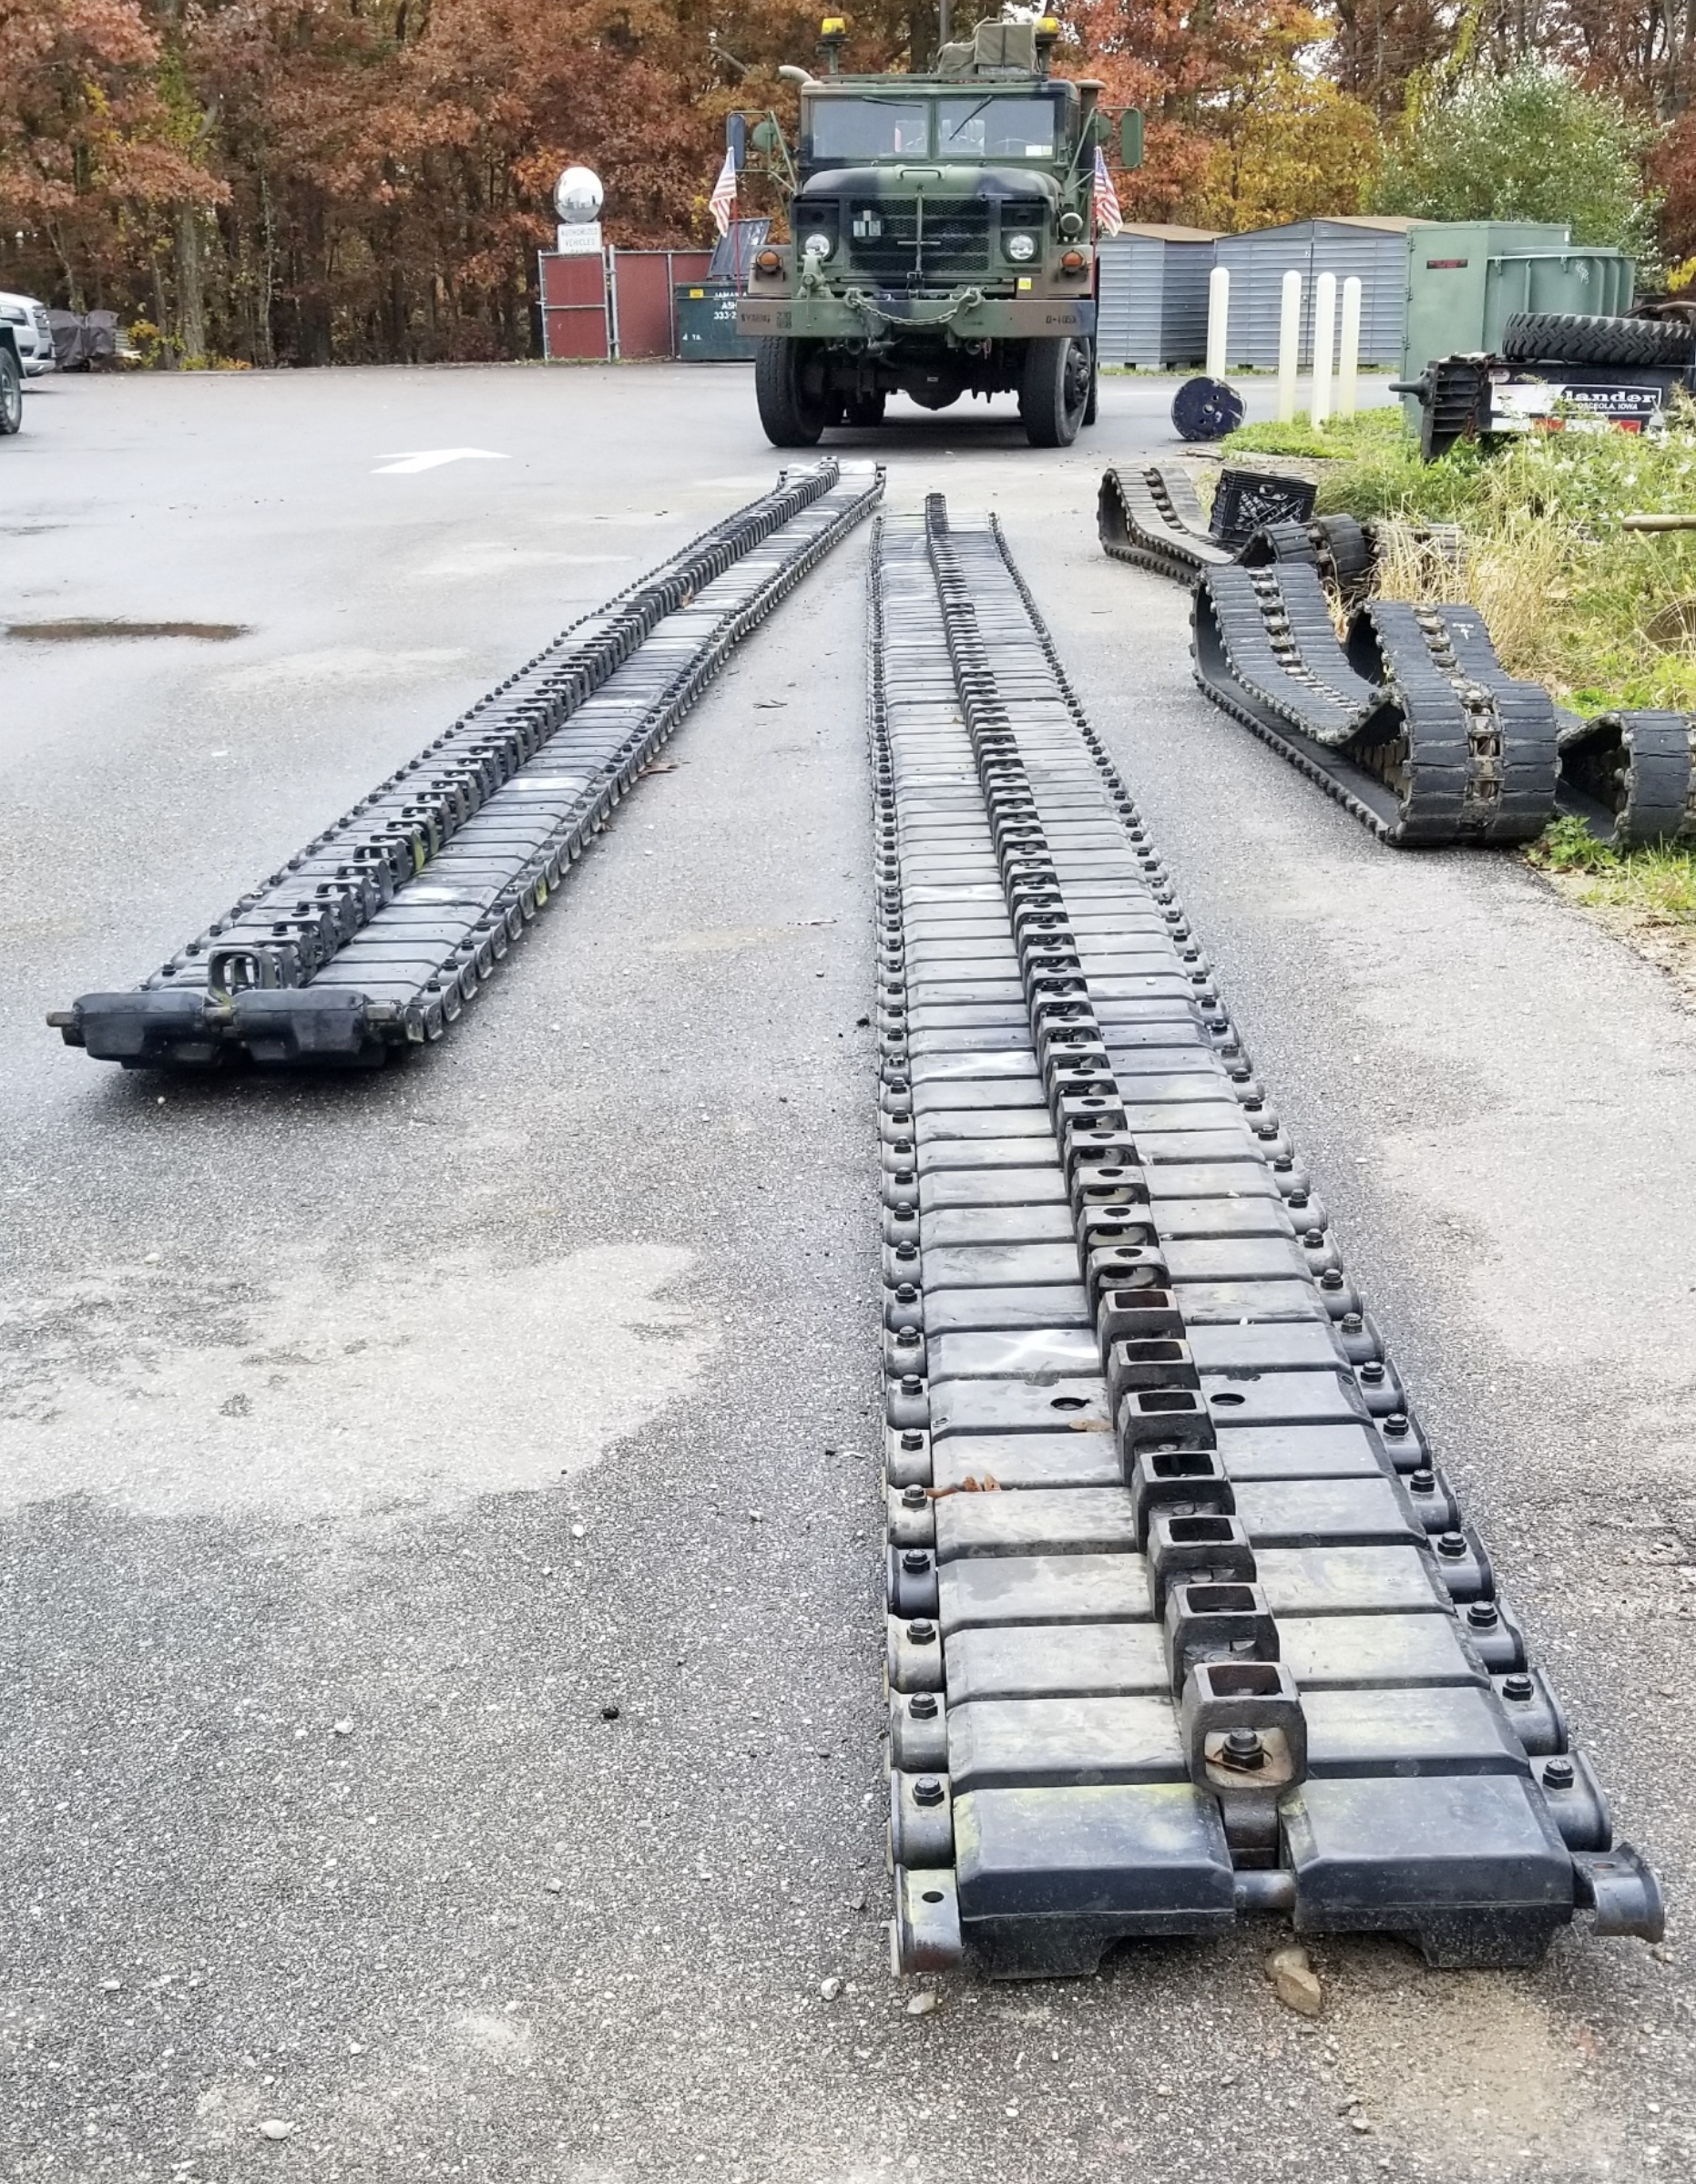 Tank tracks laid out end to end